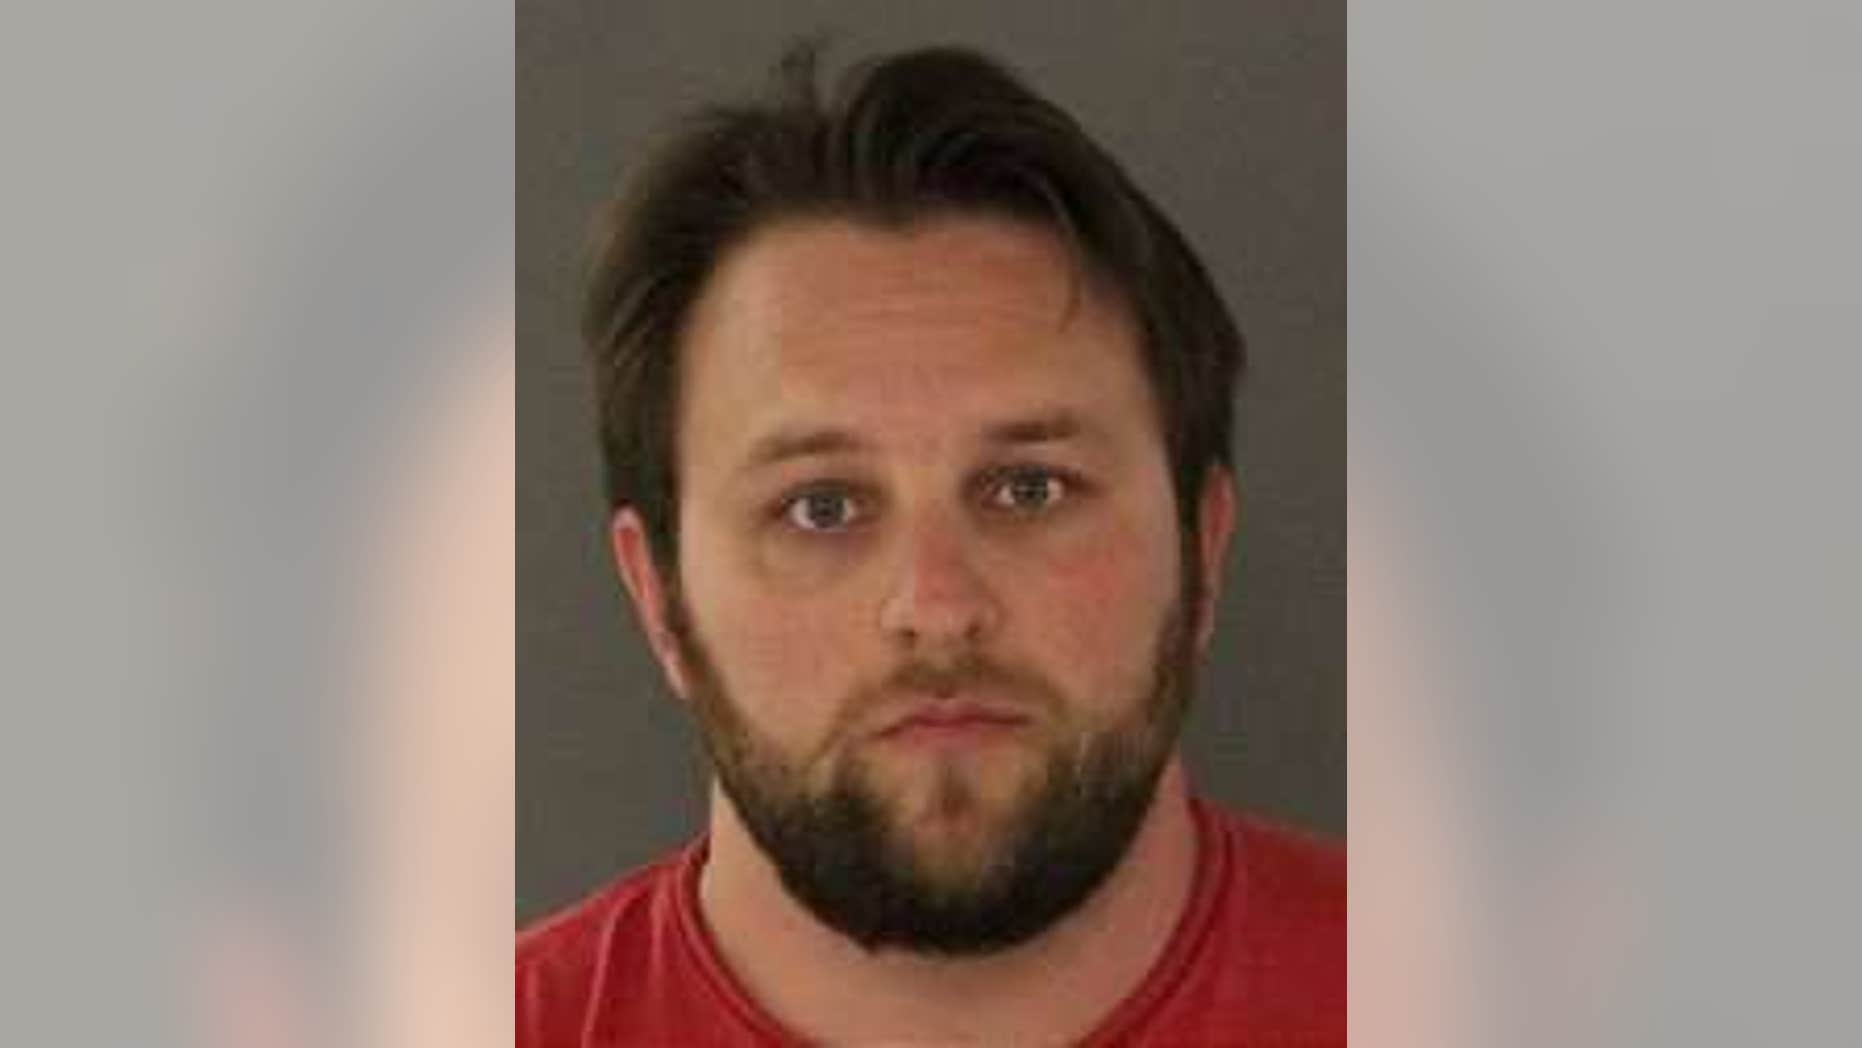 Middle School Student Porn - California teacher allegedly blackmailed student he molested ...